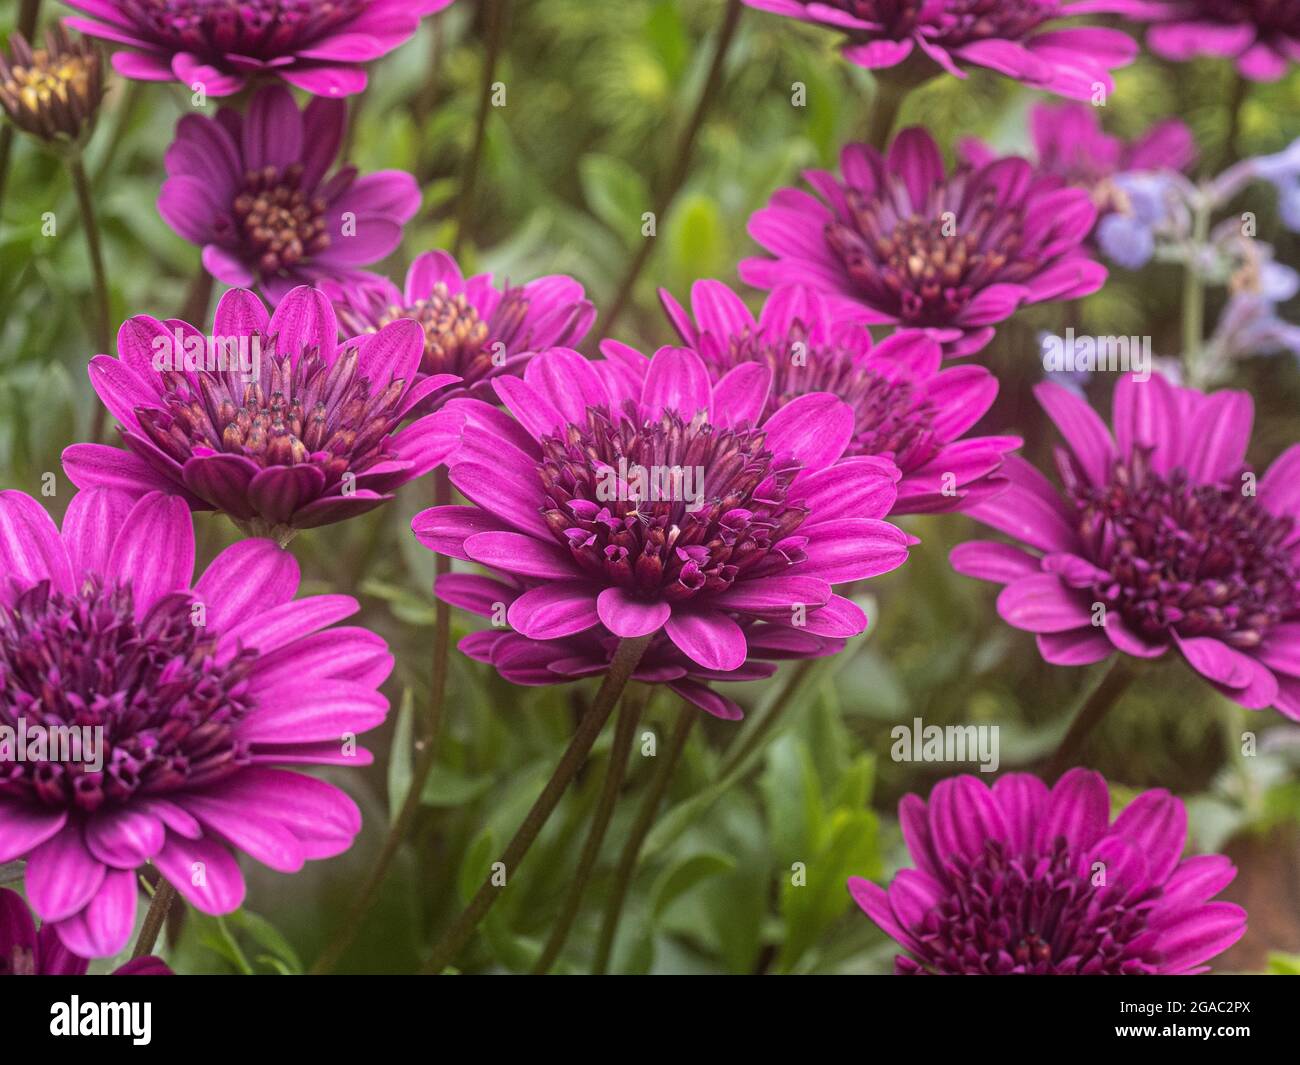 A group of the violet flowers of Osteospermum Erato Double Bright Violet Stock Photo